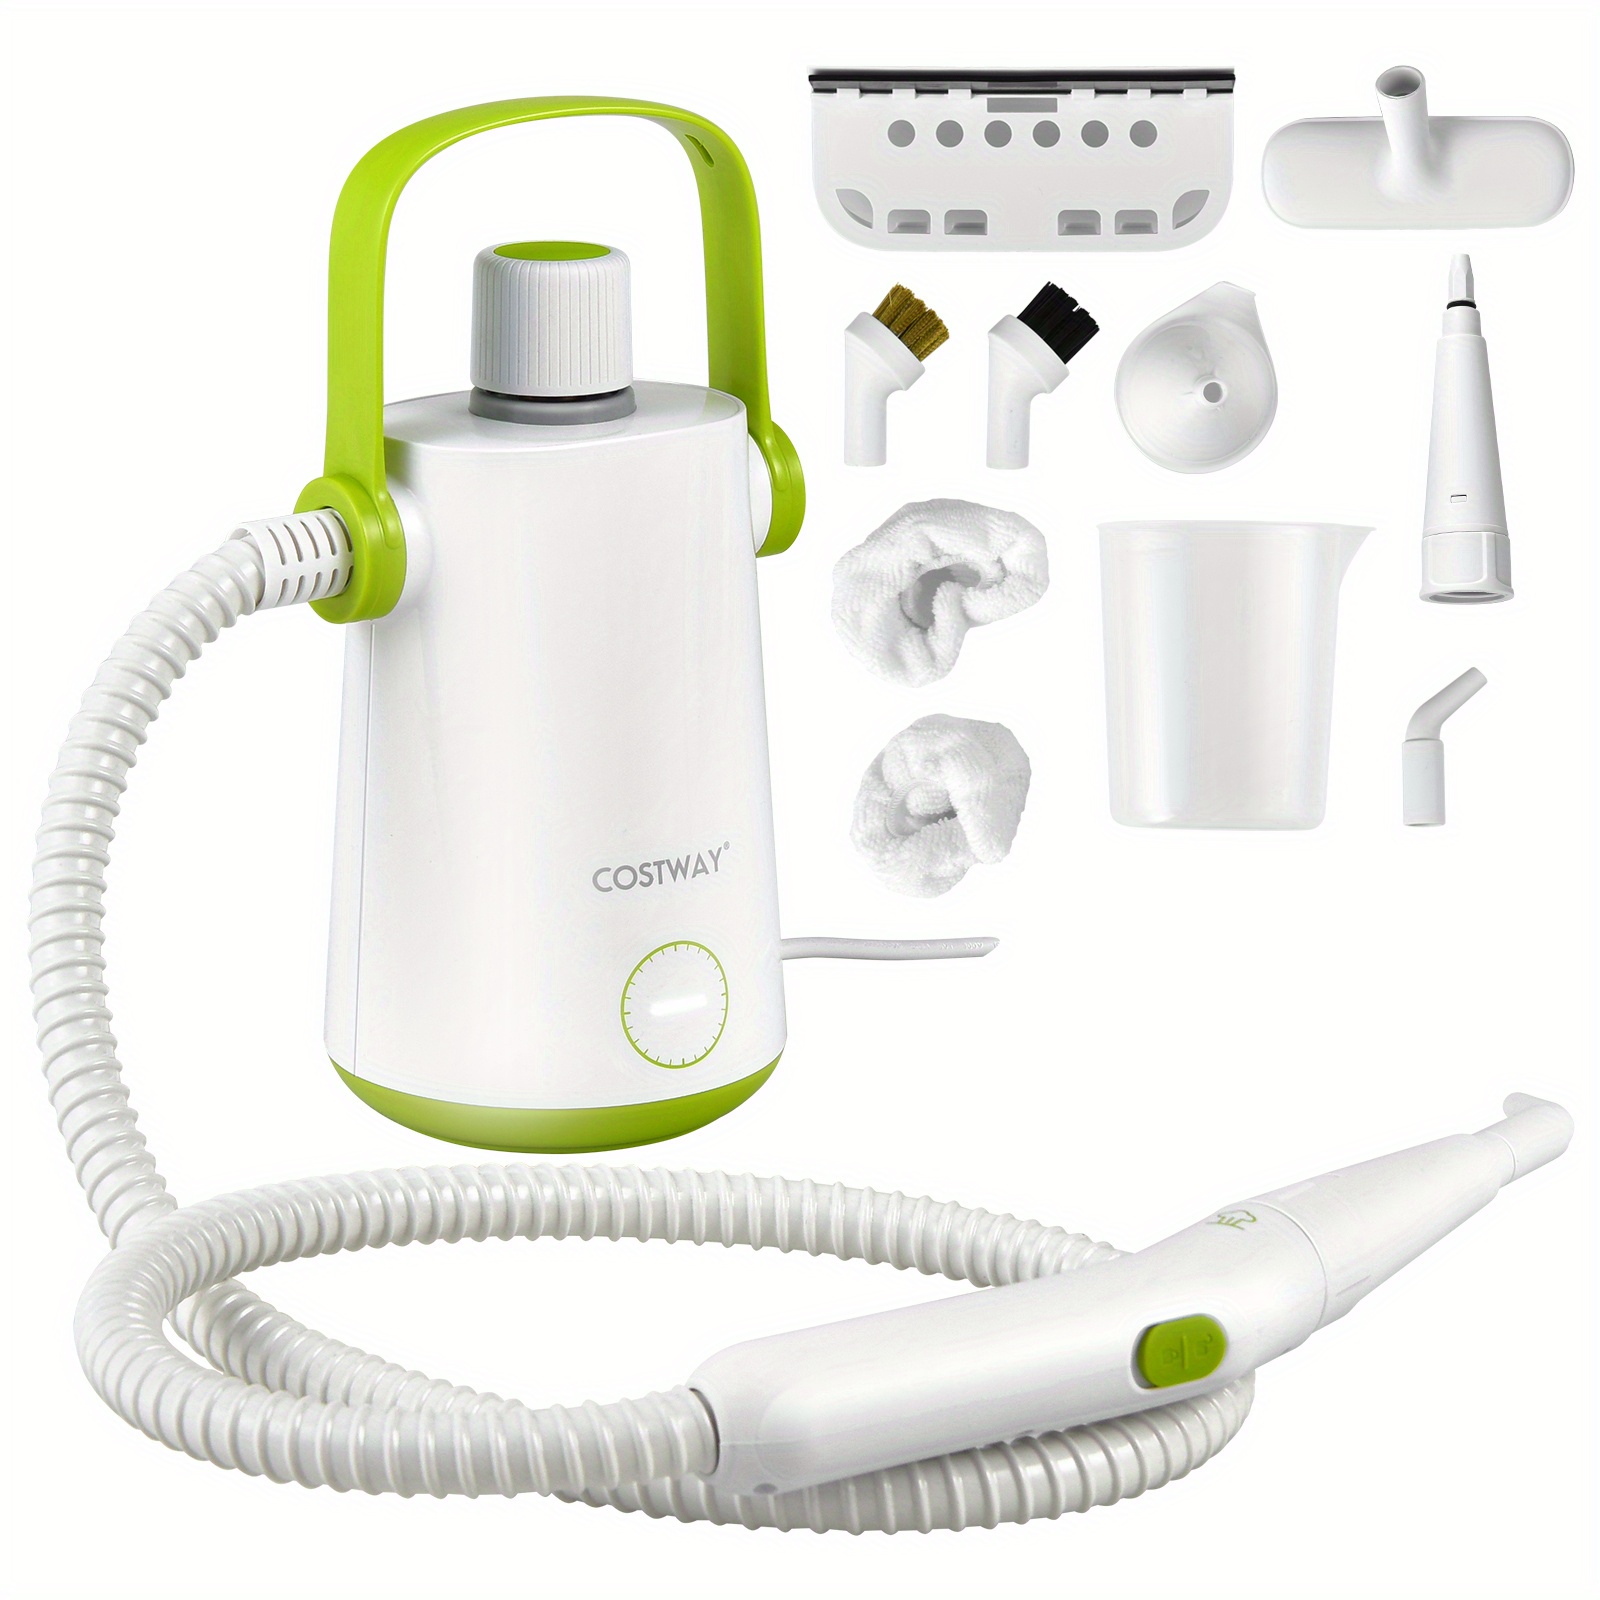 

1000w Multifunction Portable Hand-held Steam Cleaner W/10 Accessories Green